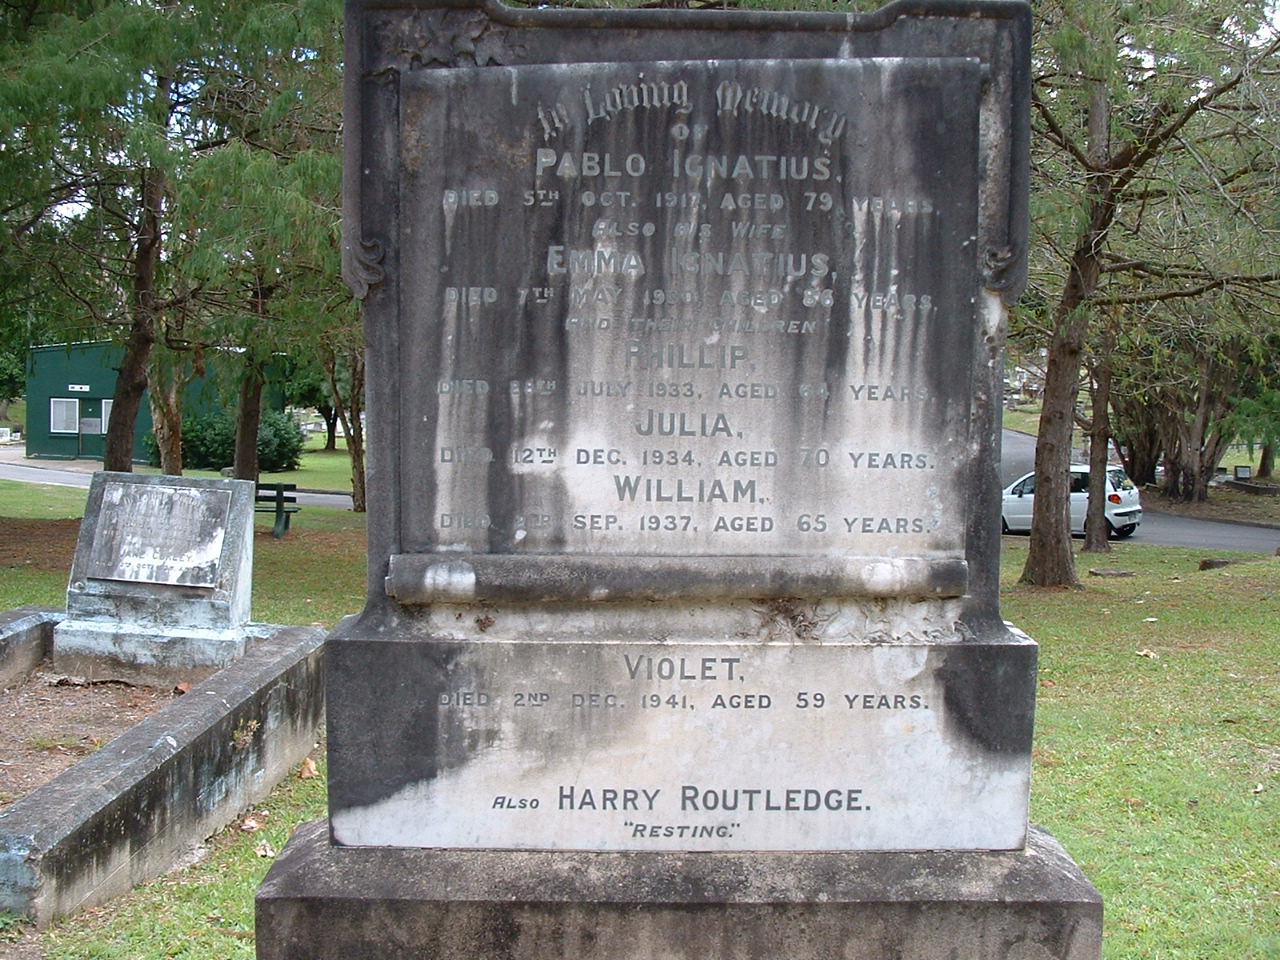 Photograph of the grave and headstone of Edward Routledge. Source: Private collection of Lee Butterworth.